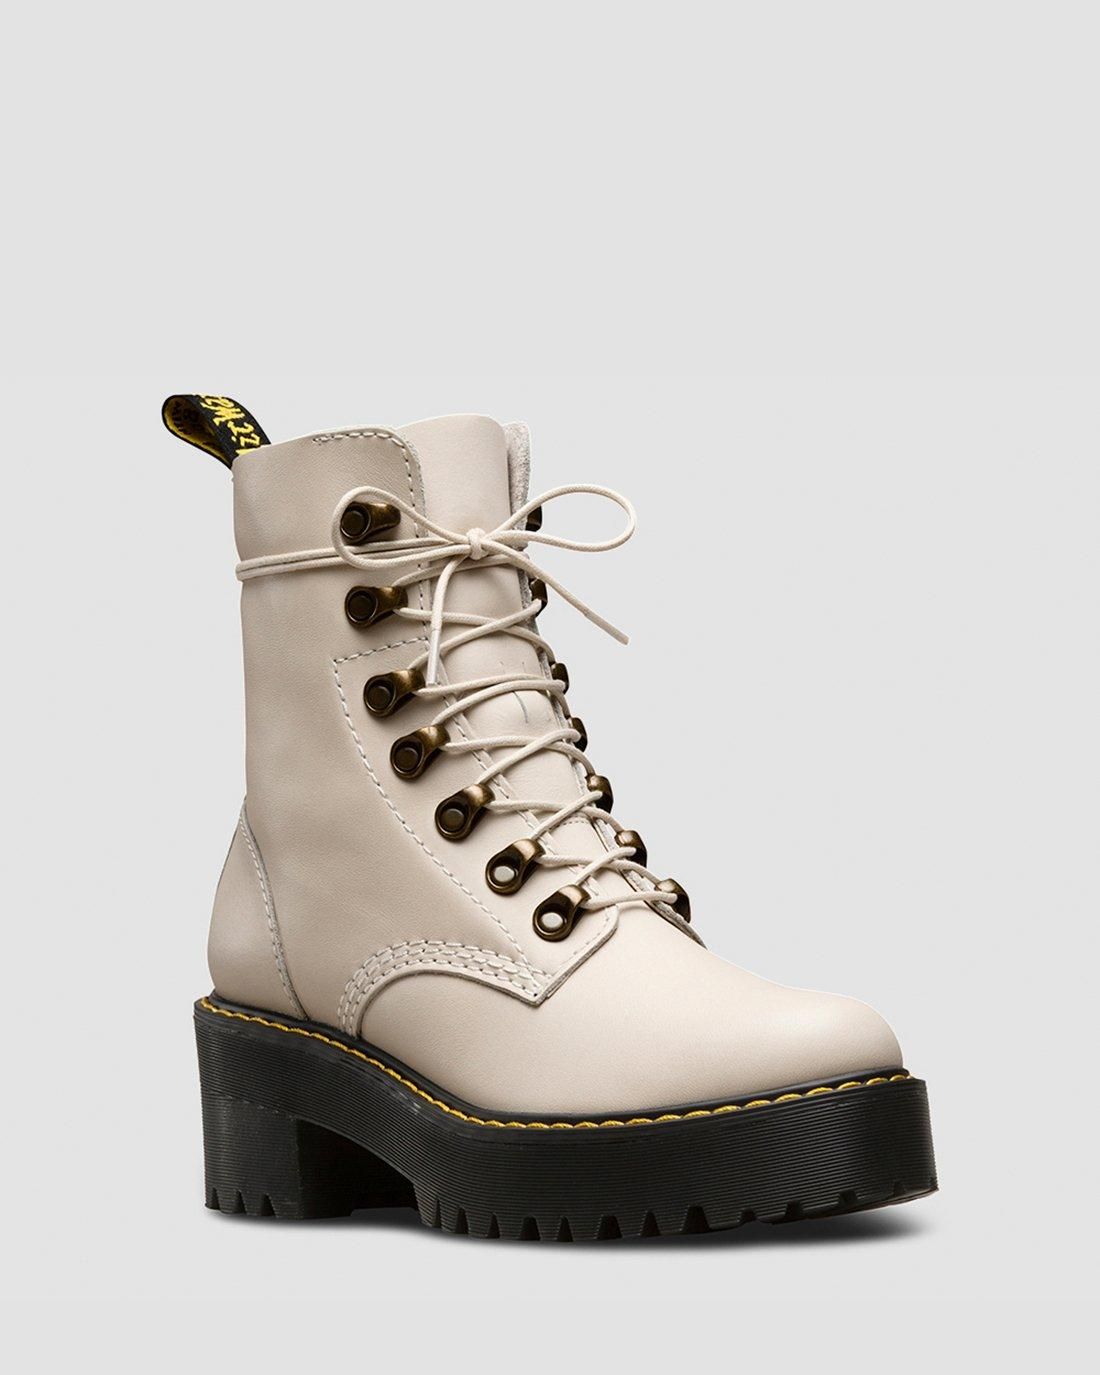 Leona Women's Temperley Leather Heeled Boots | Dr. Martens